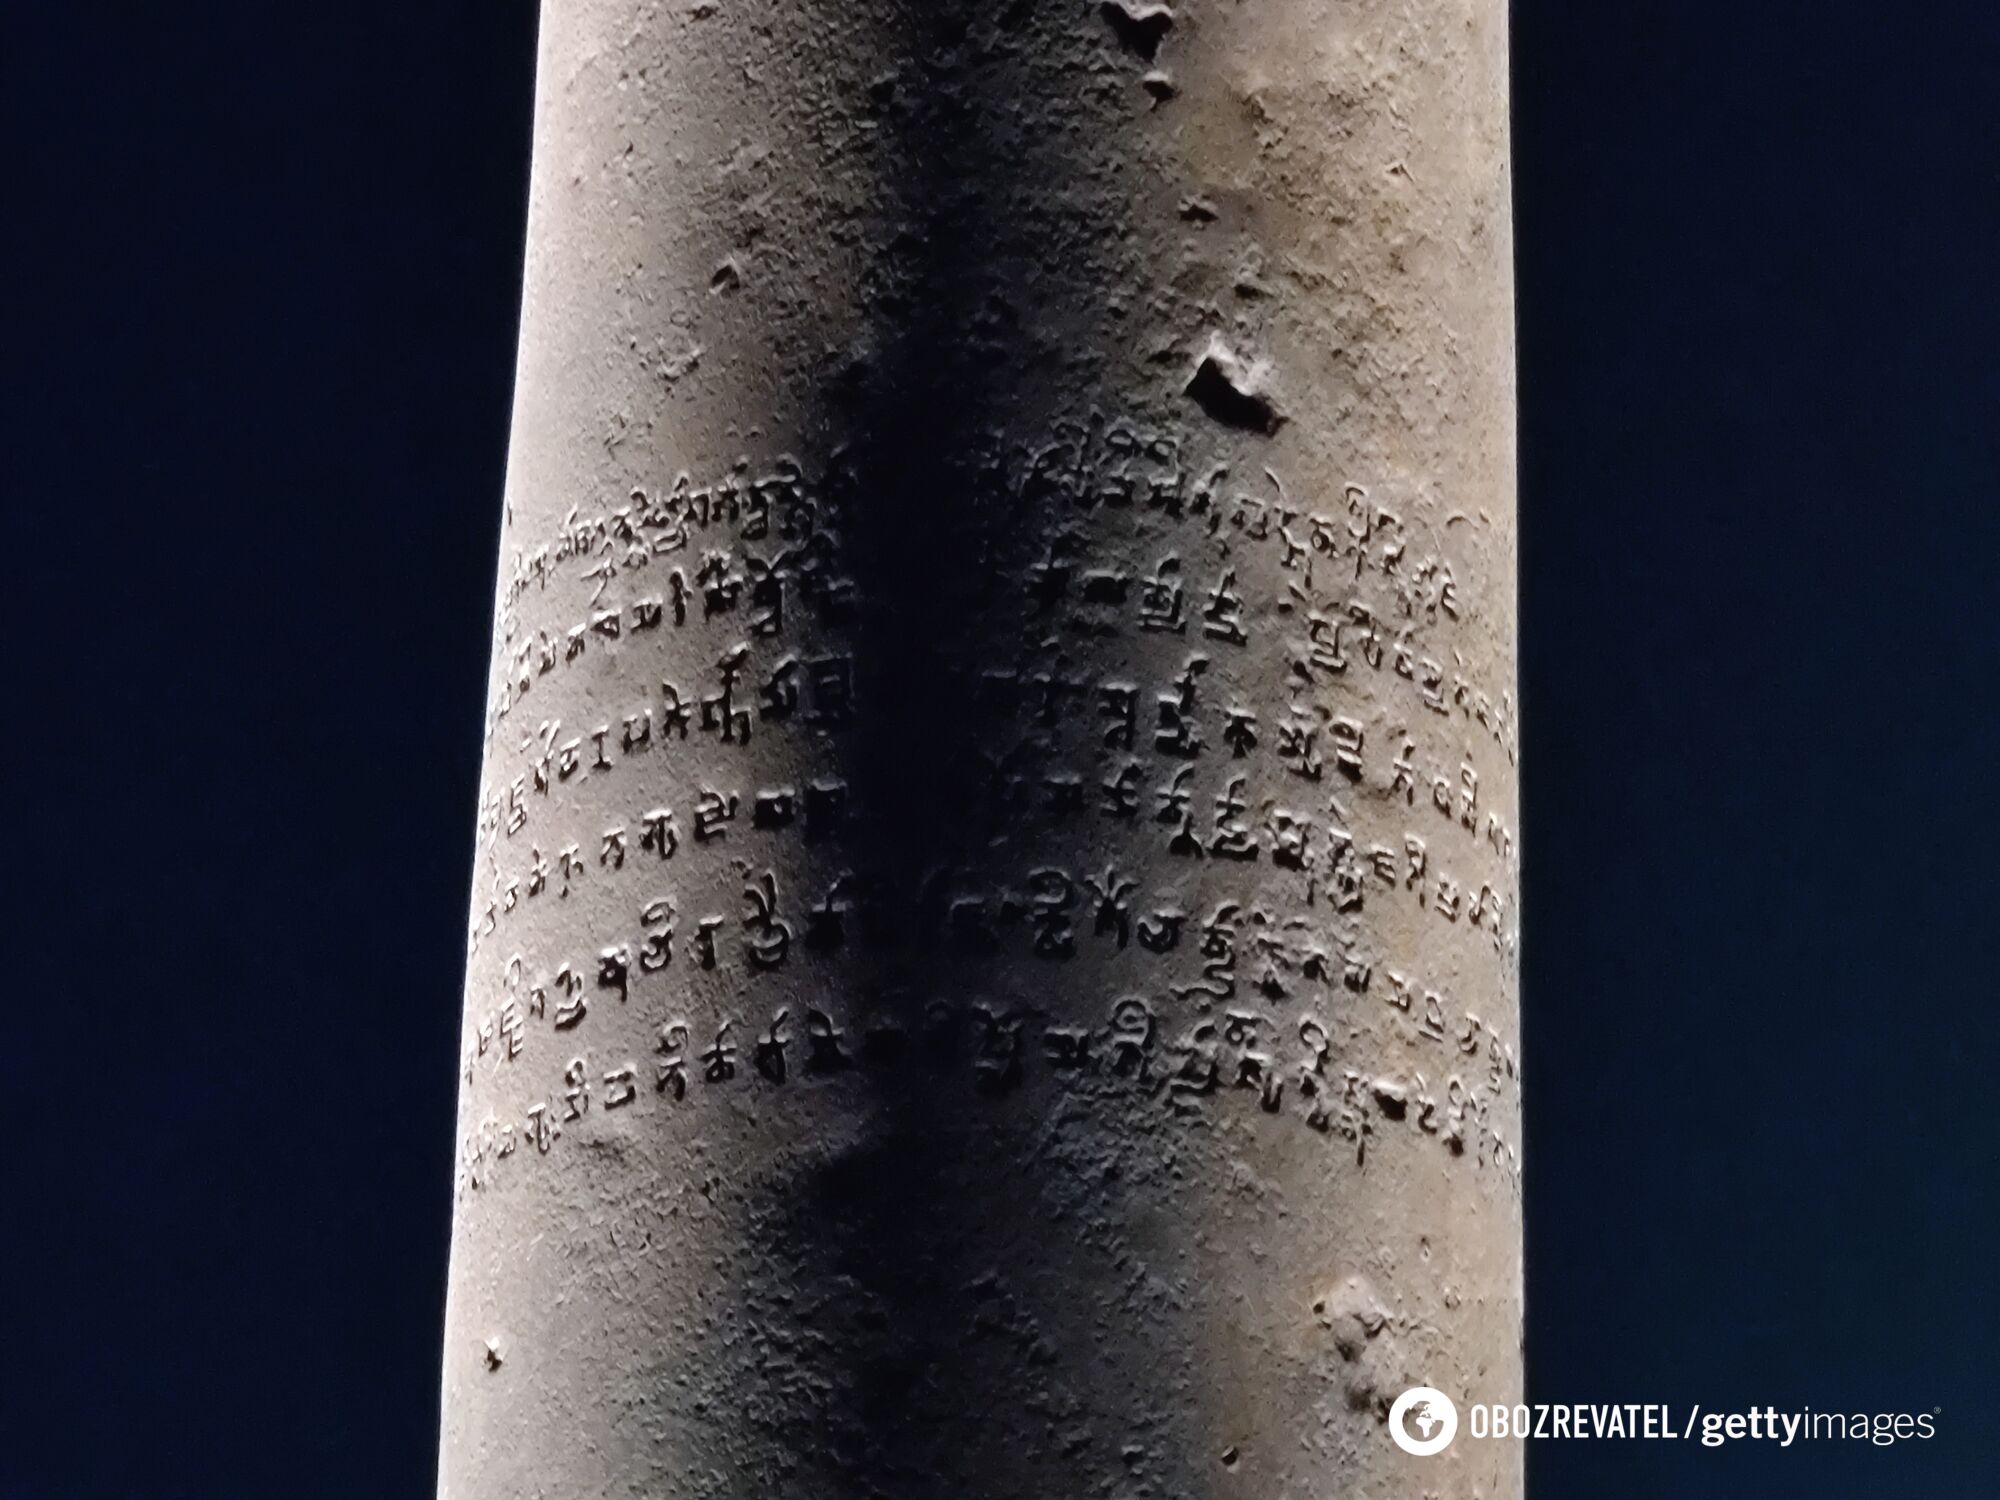 Stainless iron: what is the secret of India's world-famous 'wishing pillar' and what this 1,600-year-old column look like